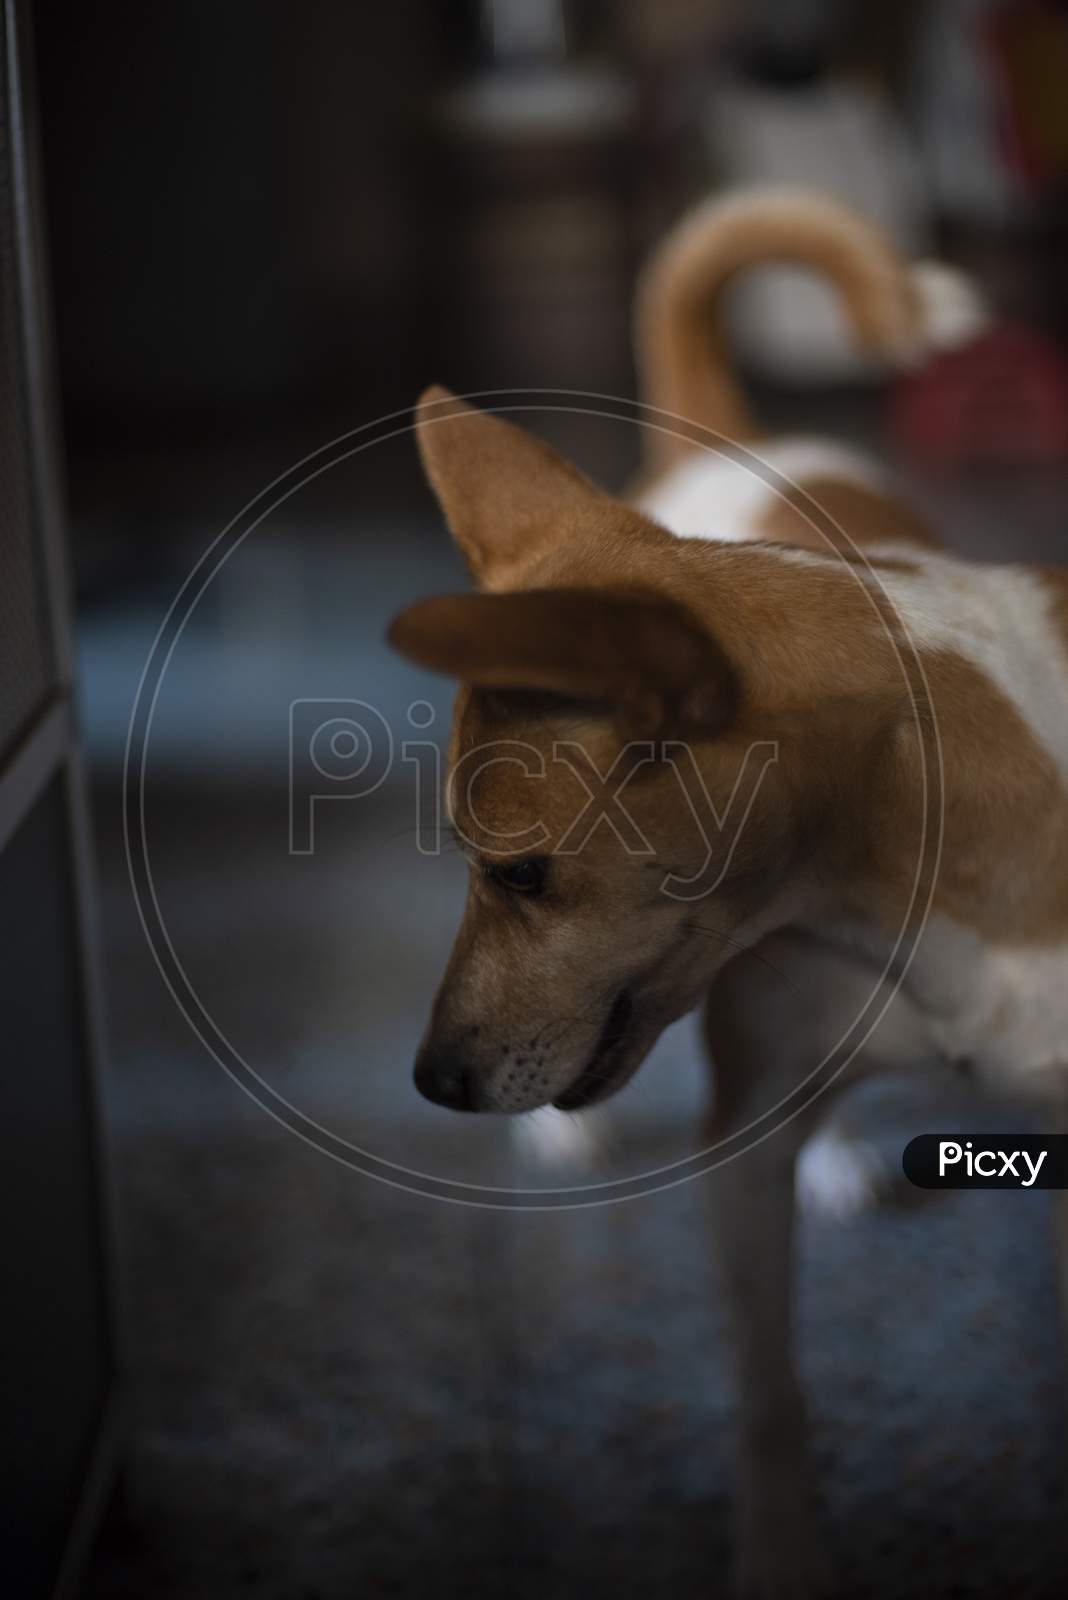 Portrait of a beautiful cute Indian breed domestic dog in a lazy mood to play. Indian breed dogs